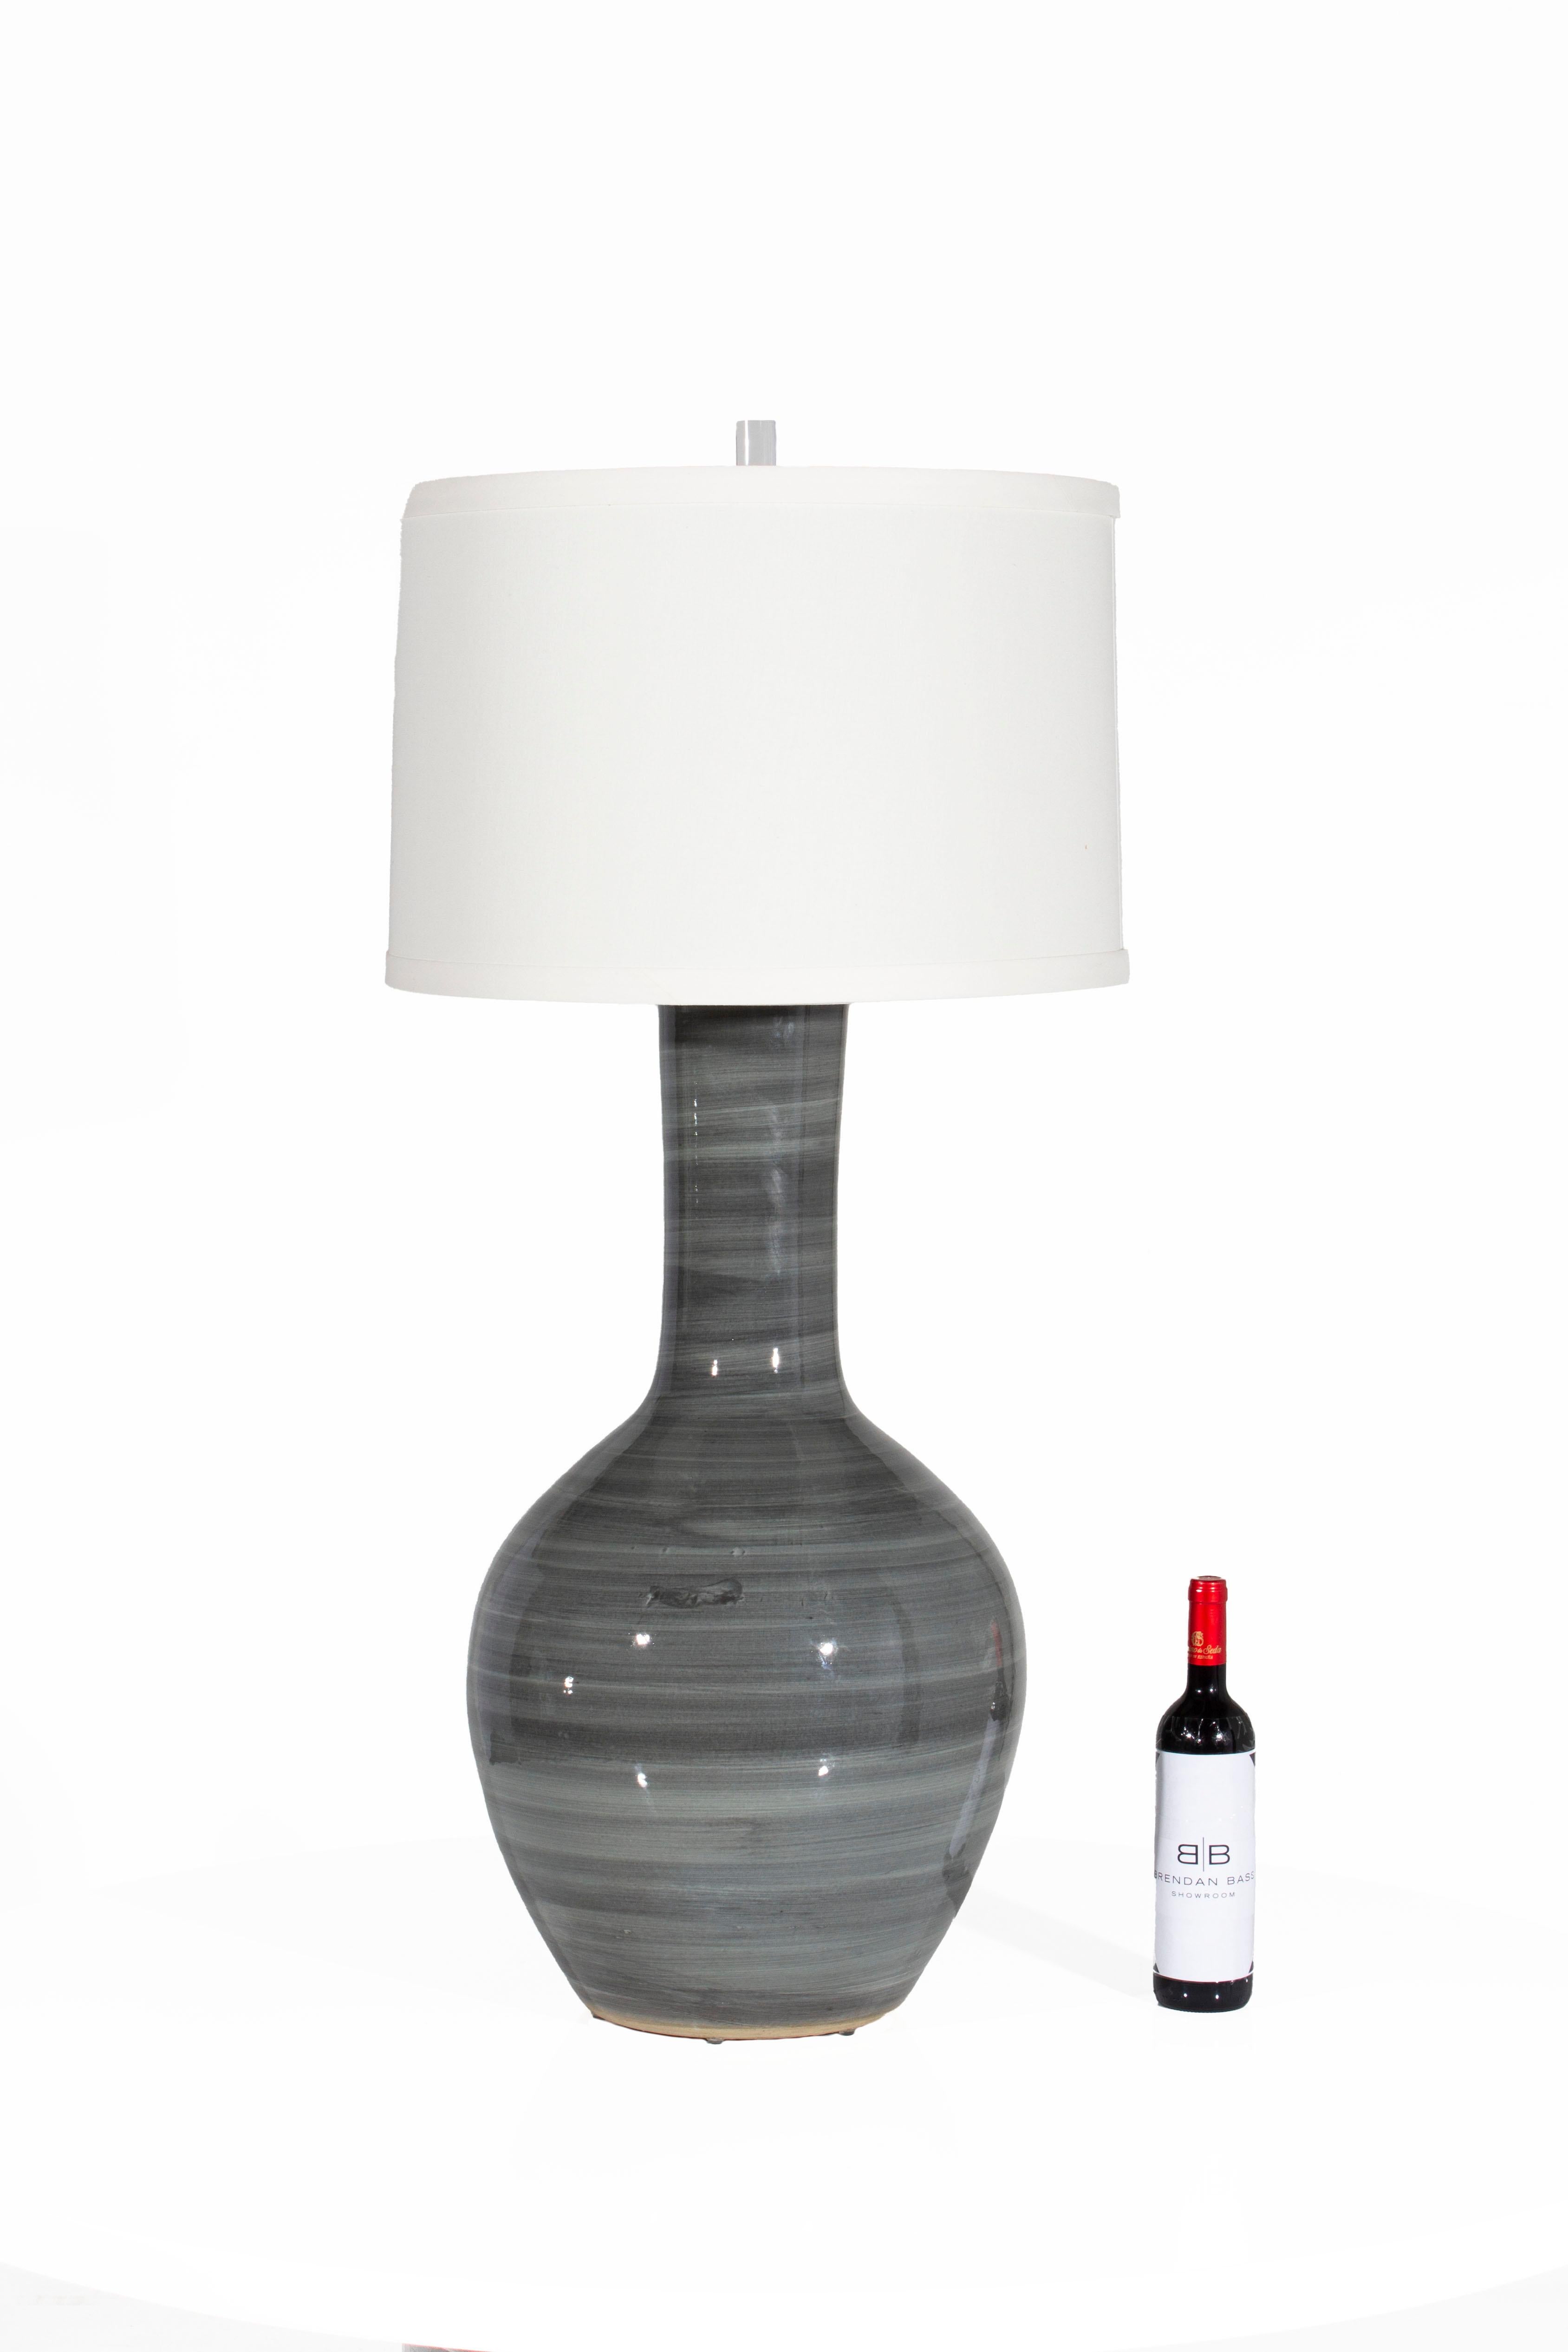 Contemporary porcelain vase form as lamp

Vase is sourced from Belgium by Brendan Bass. Made in to lamp in Dallas, TX by local artisans.

Measures: Diameter with shade 20